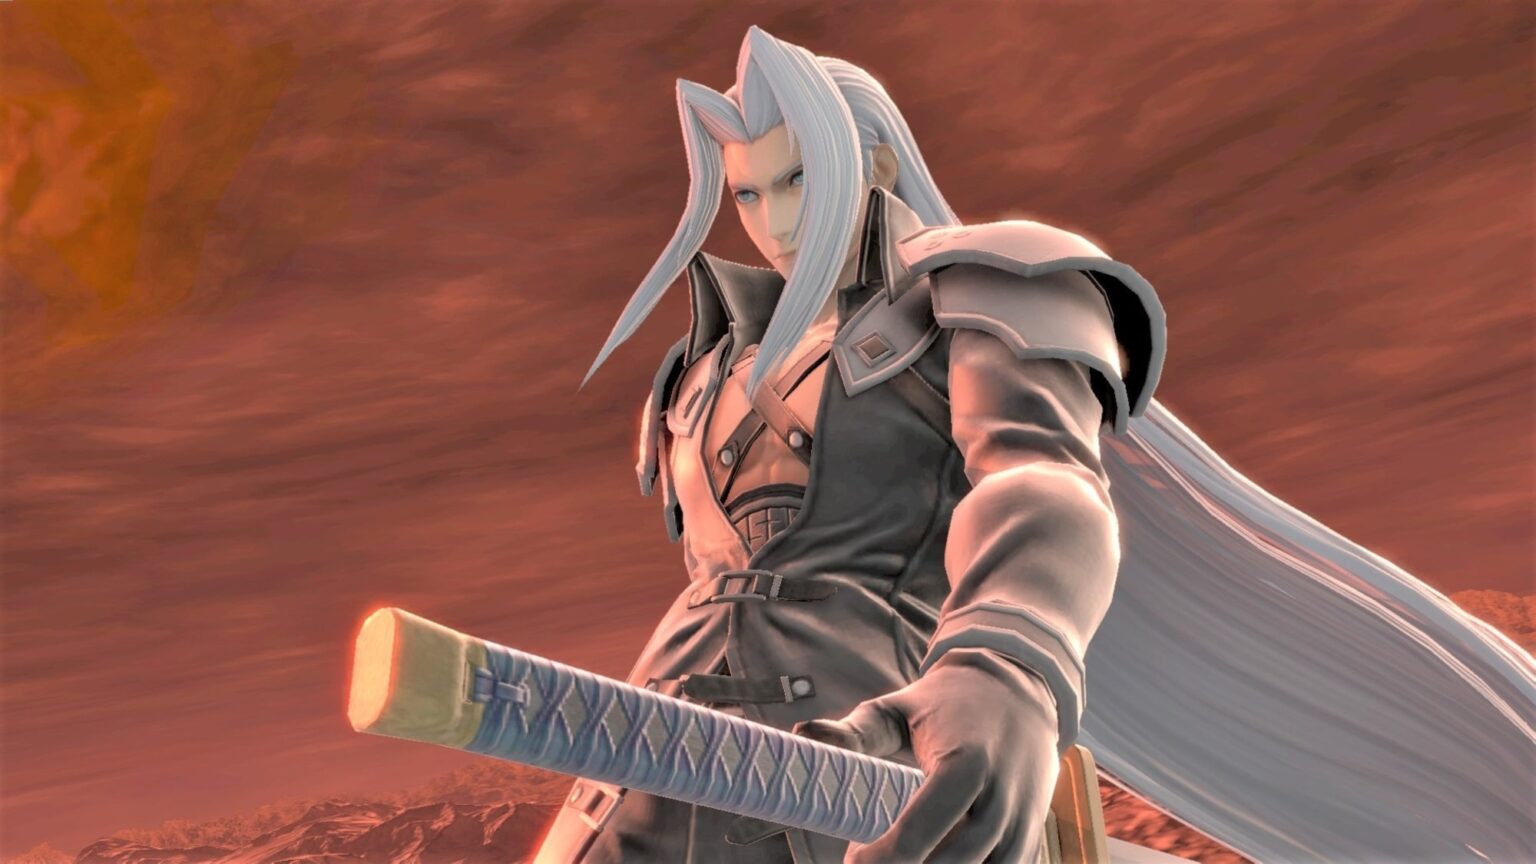 Attention gamers! Super Smash Bros. Ultimate welcomes Sephiroth to the DLC world on December 23. Get ready to challenge the Masamune blade!